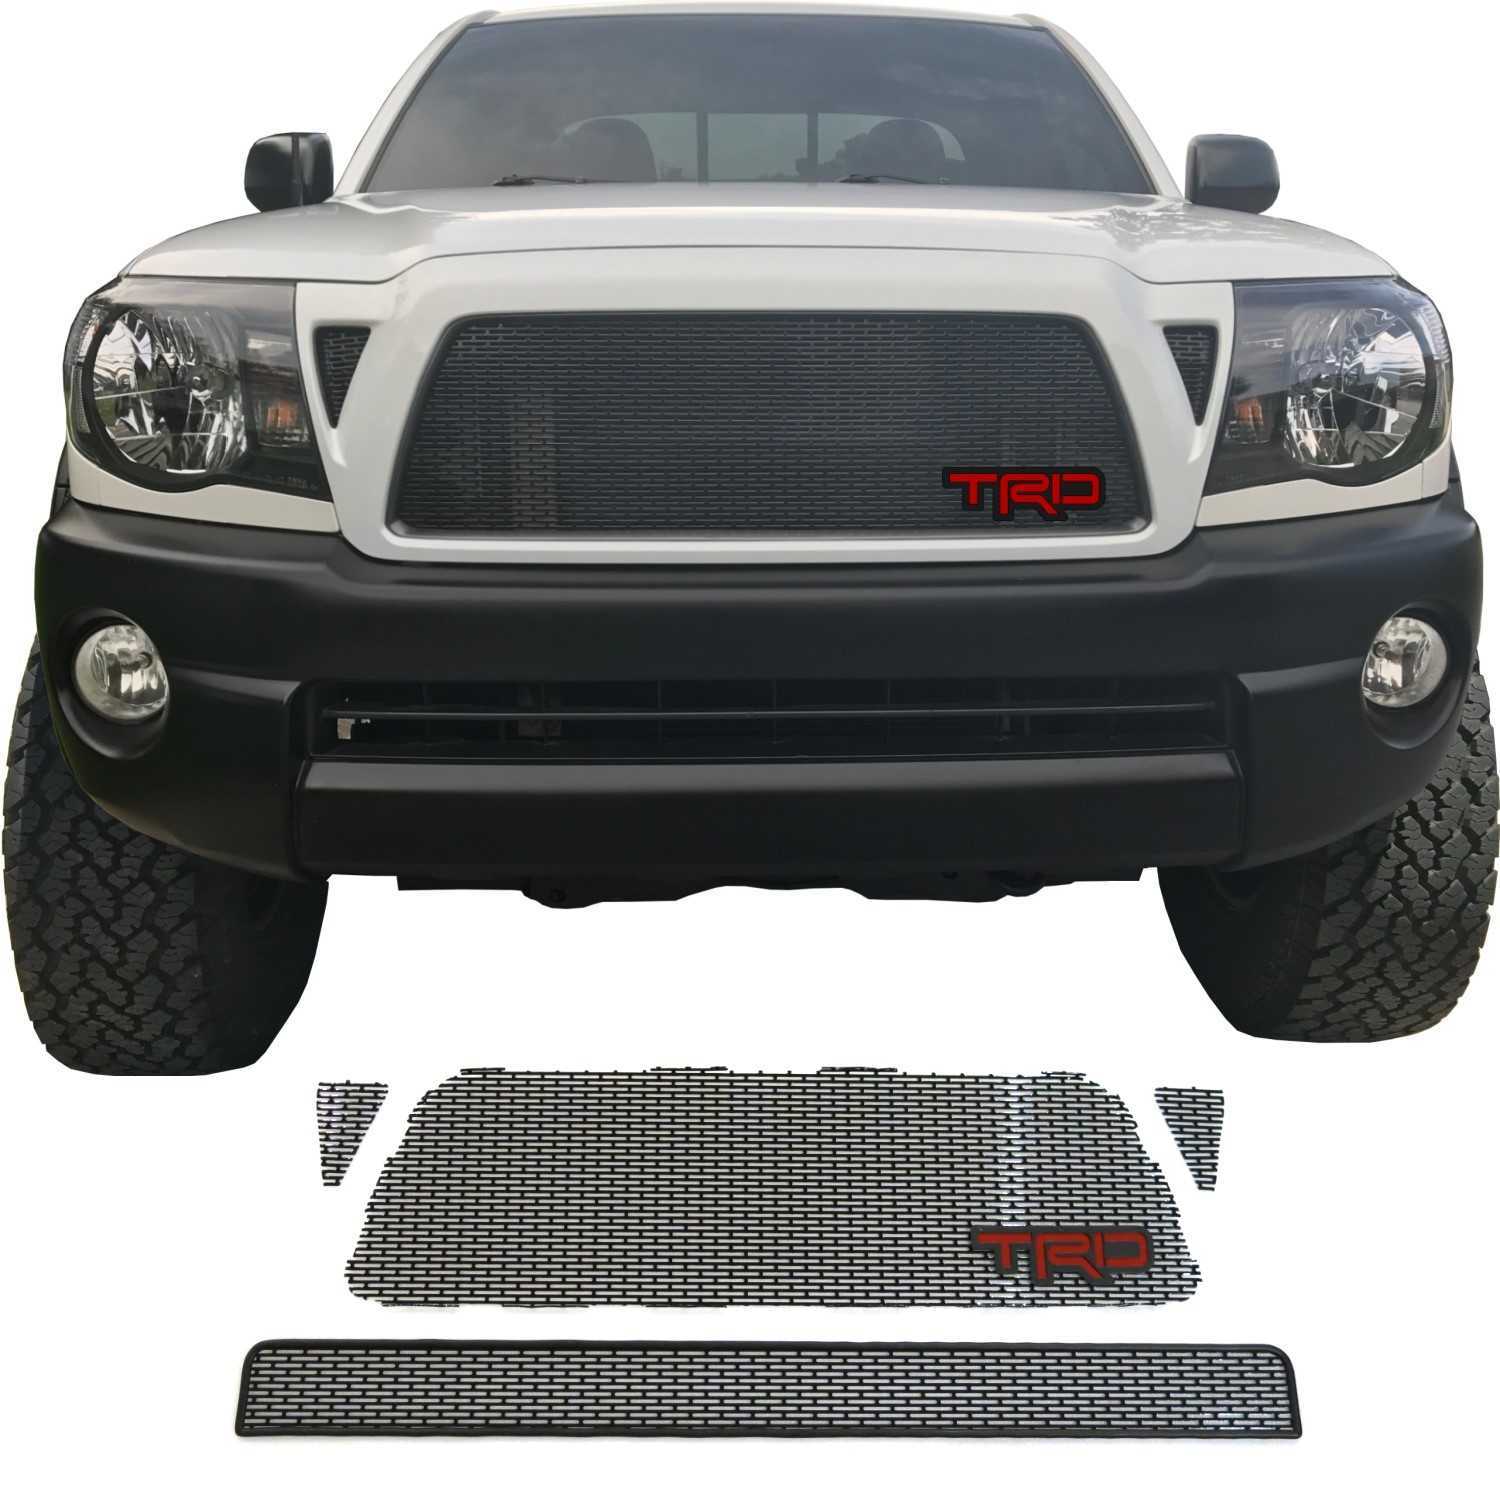 2005 - 2011 Toyota Tacoma Mesh Grill With TRD Emblem